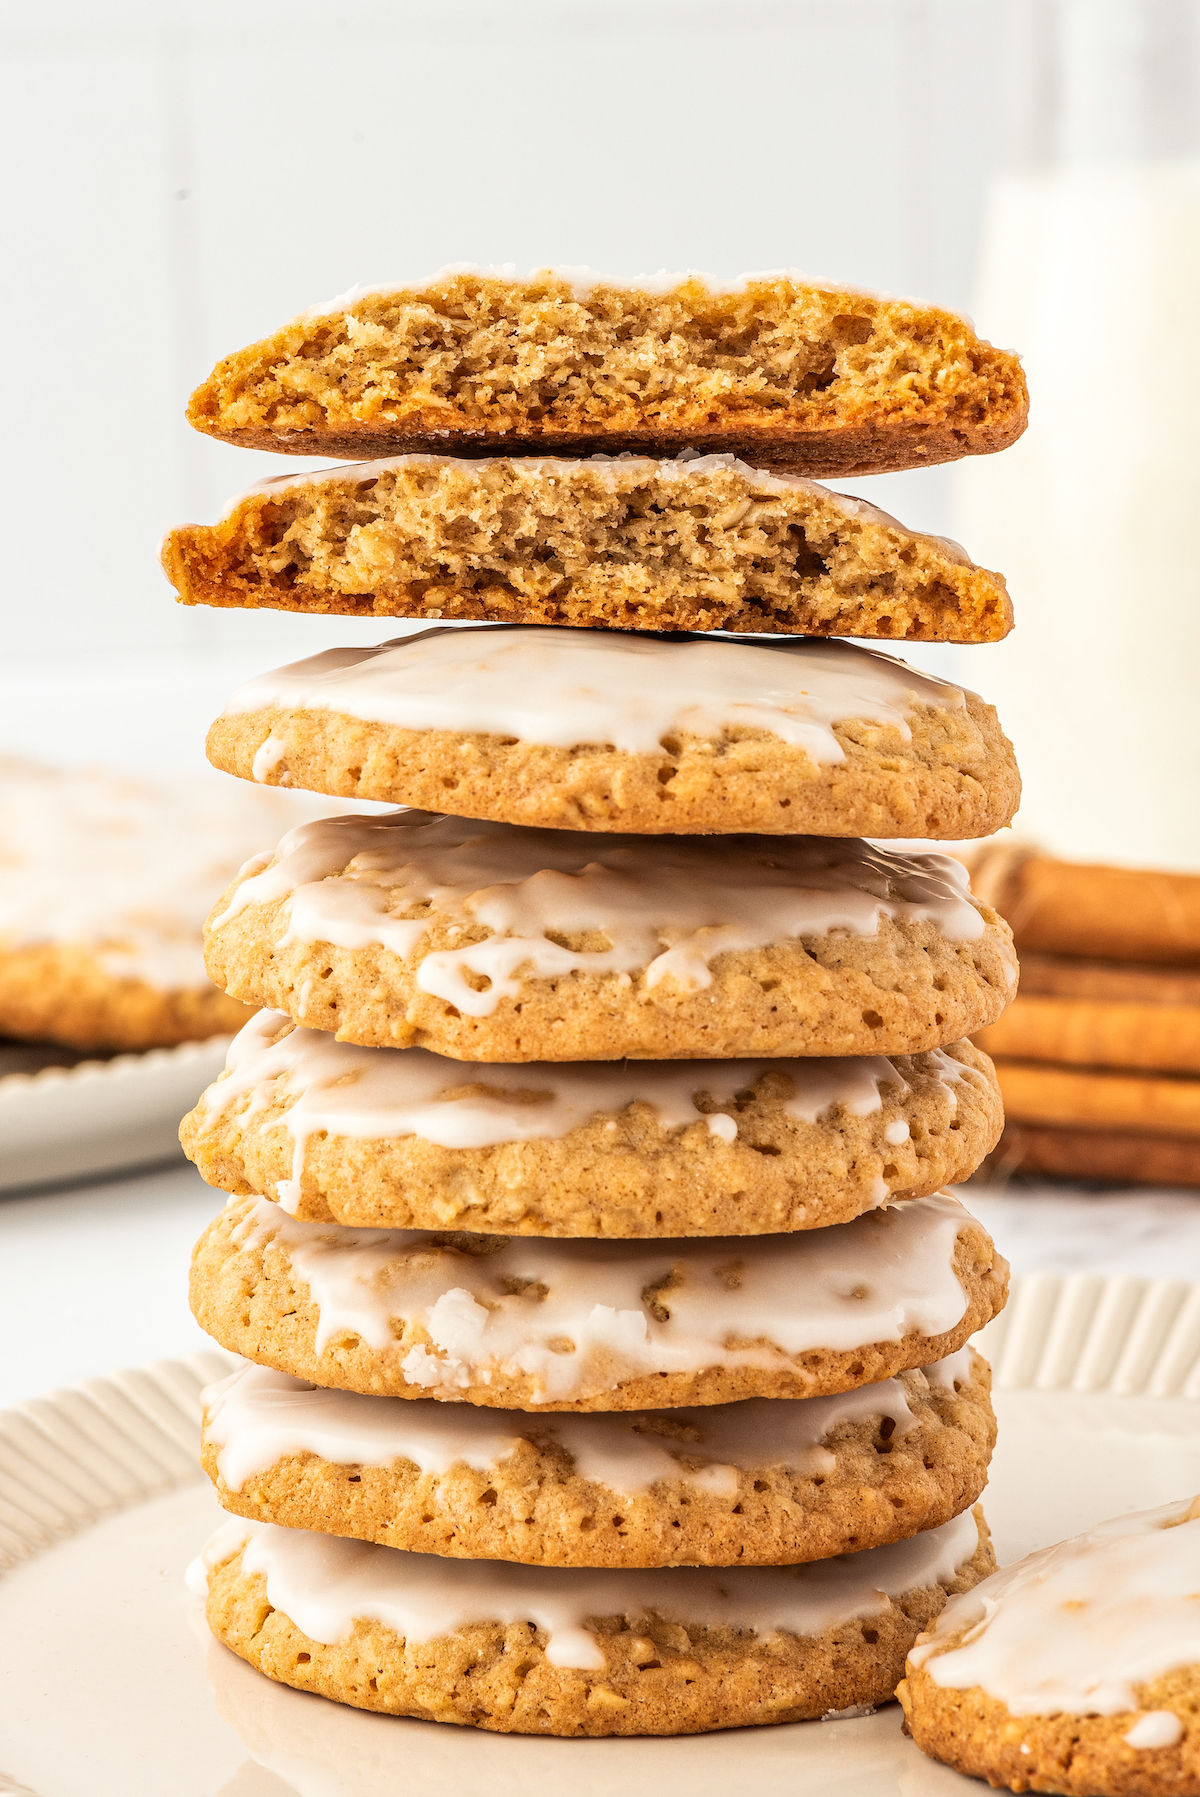 Six oatmeal cookies stacked on top of each other. A seventh cookie has been broken in half to show texture, with the halves balanced on top of the stack.